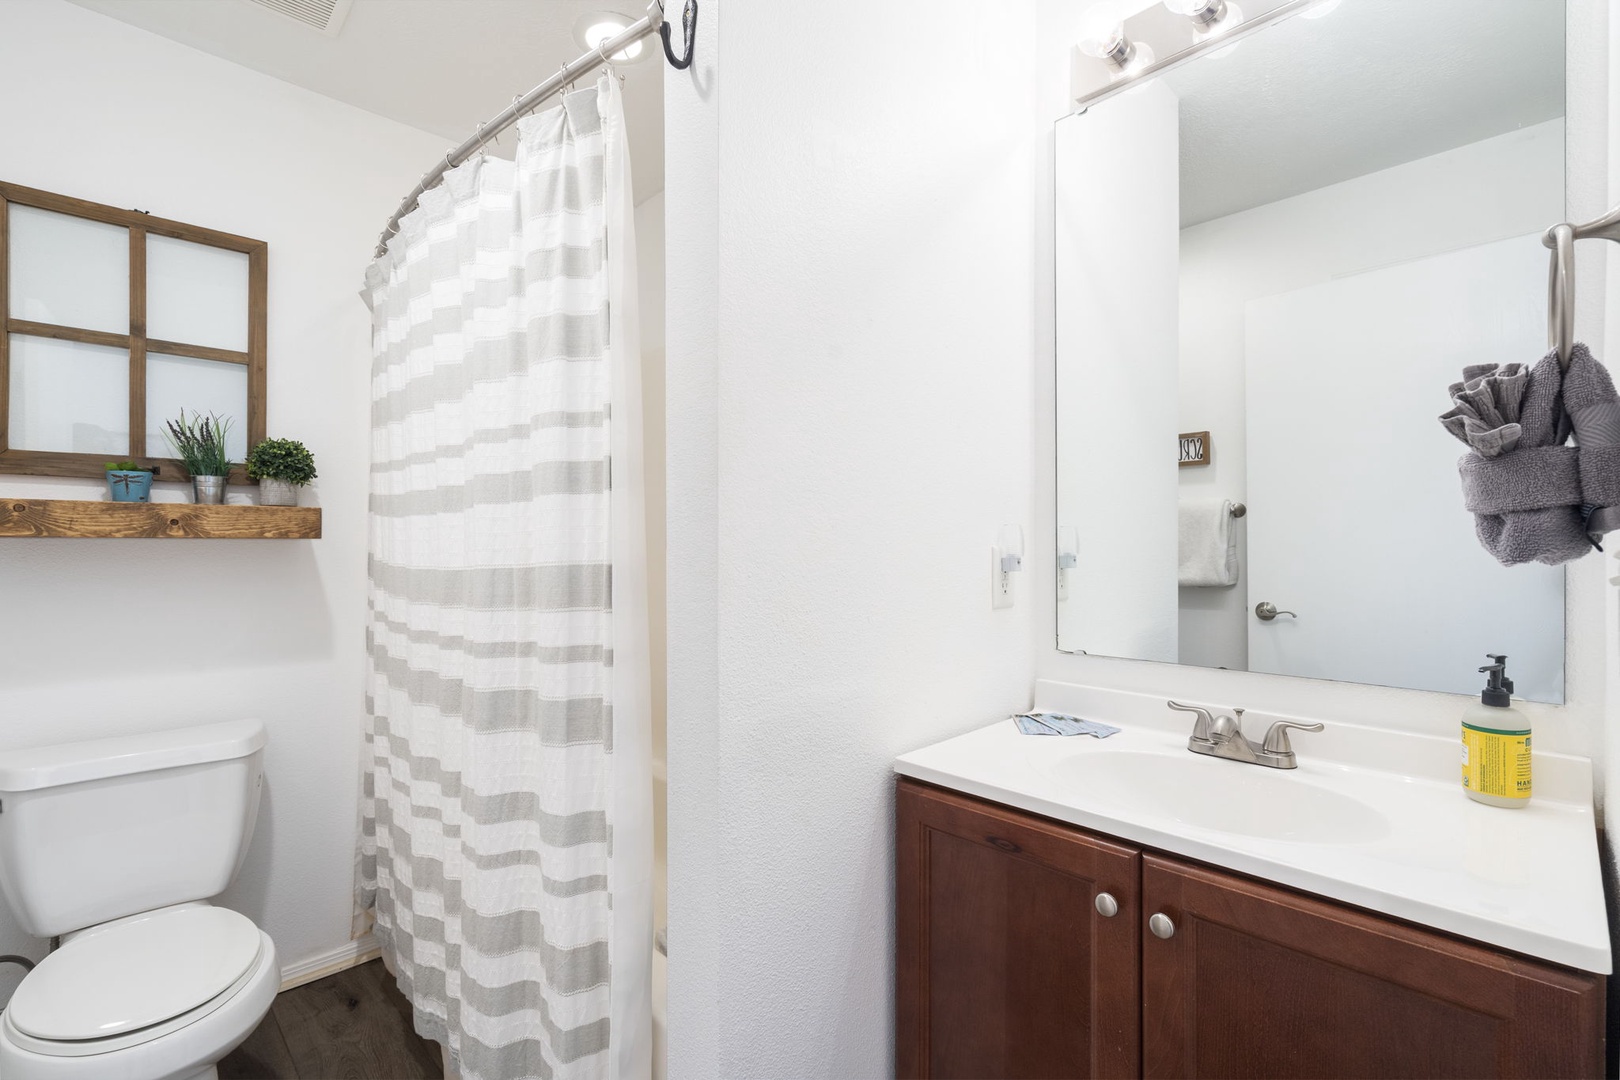 The first of two full bathrooms offers a single vanity & shower/tub combo